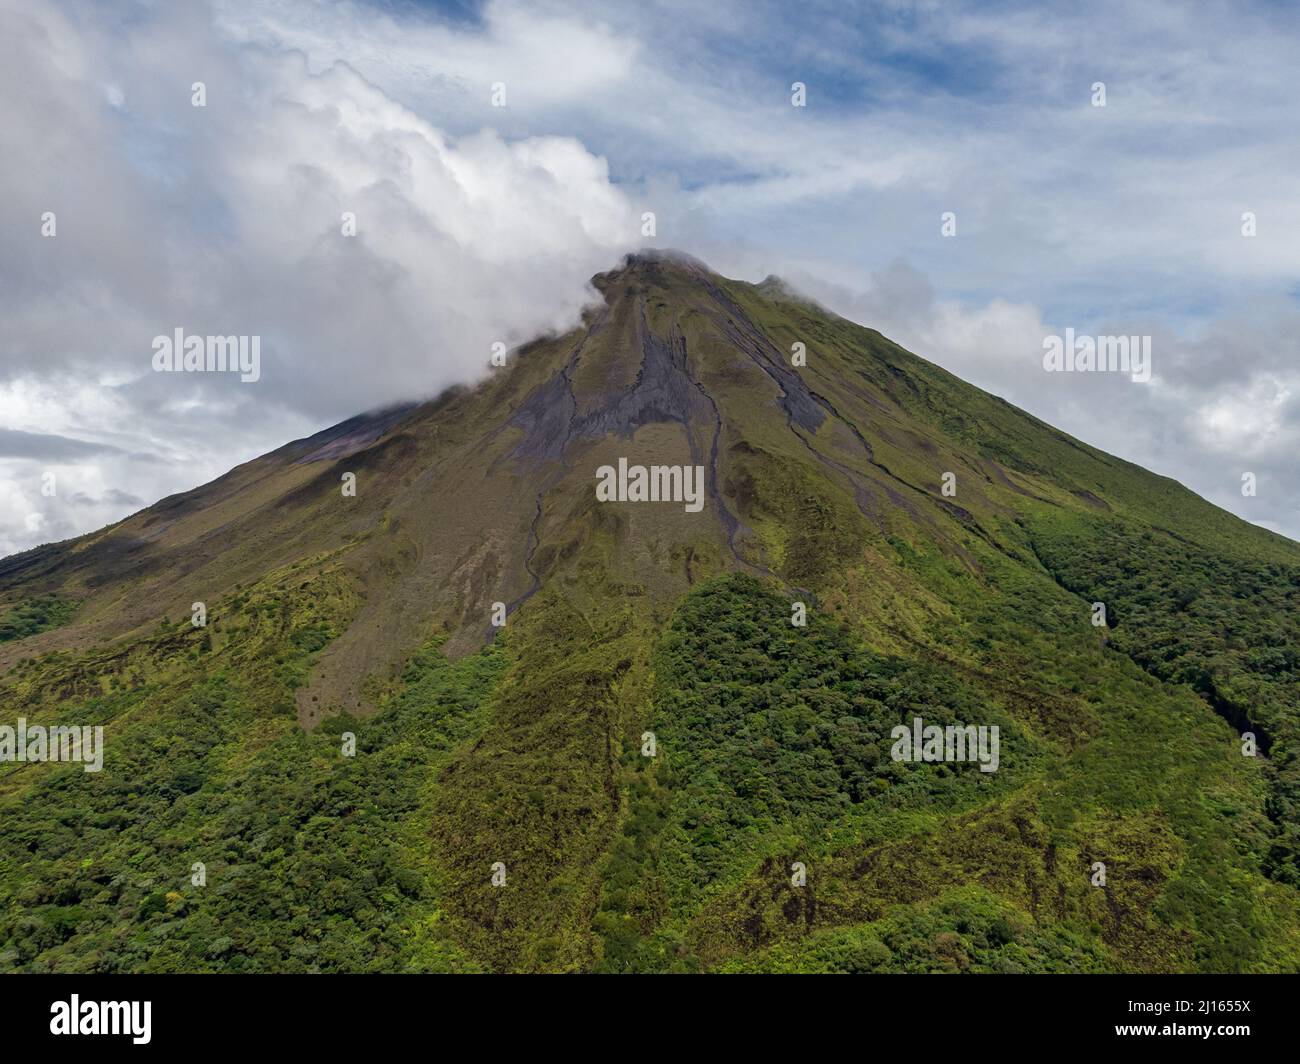 Beautiful cinematic aerial view of the Arenal Volcano in Costa Rica Stock Photo